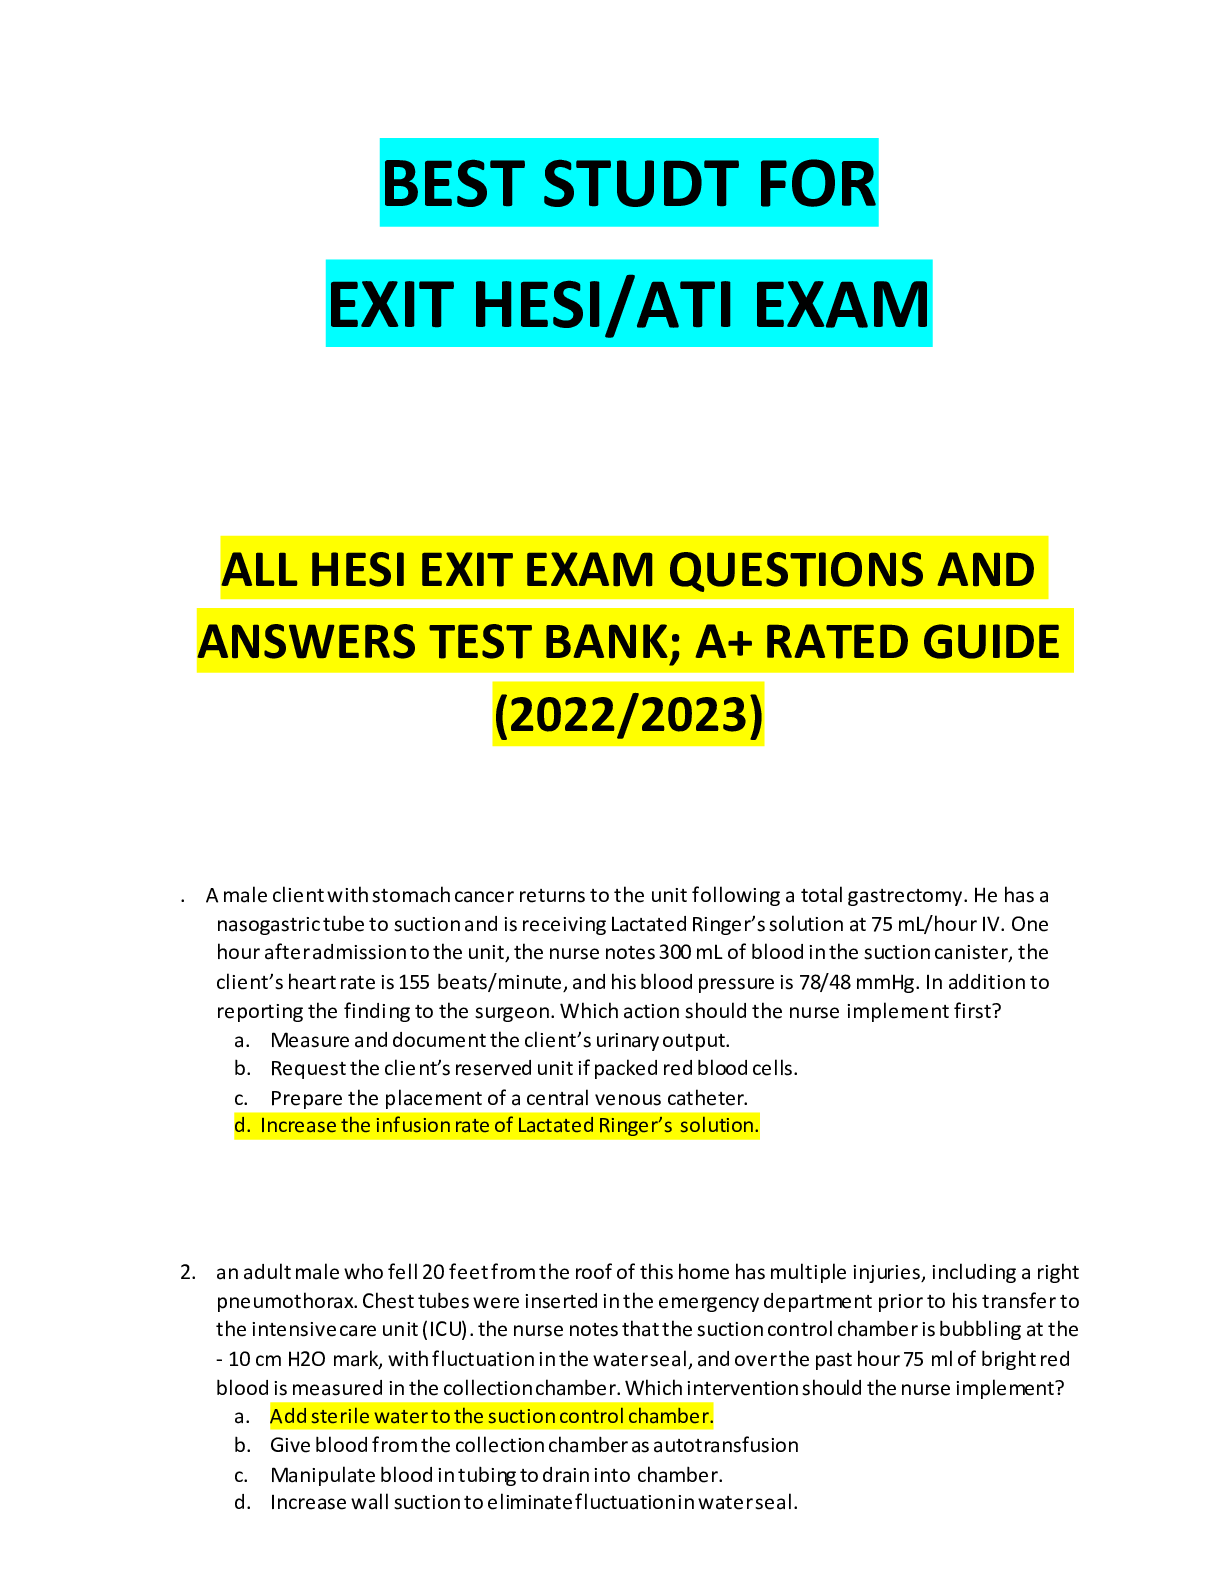 ALL HESI EXIT EXAM QUESTIONS AND ANSWERS TEST BANK; A+ RATED GUIDE